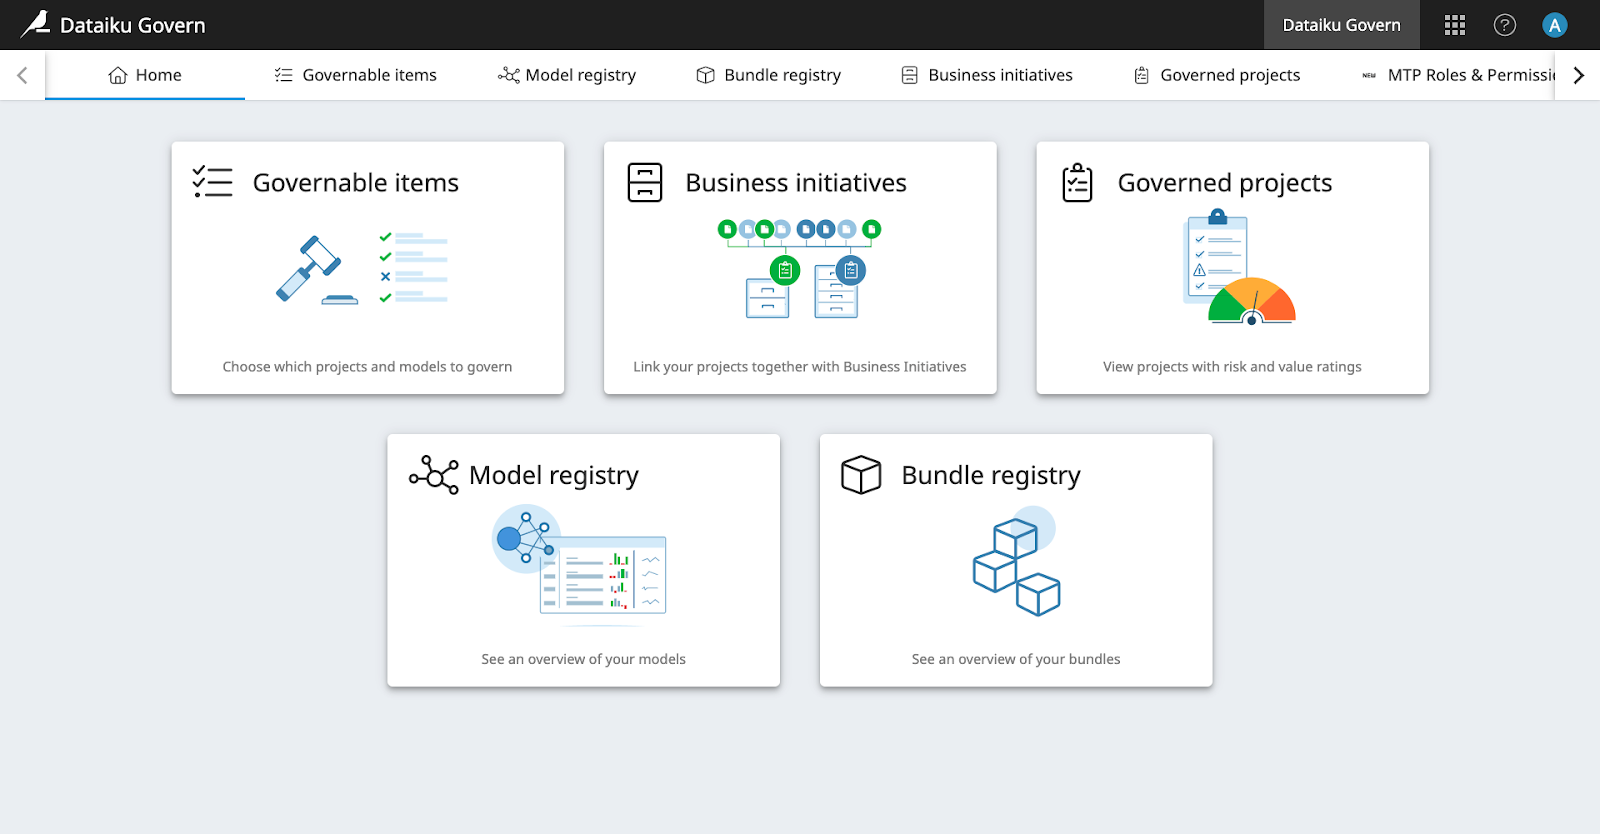 Dataiku’s built-in governance capabilities make it easy to manage projects through design and production.